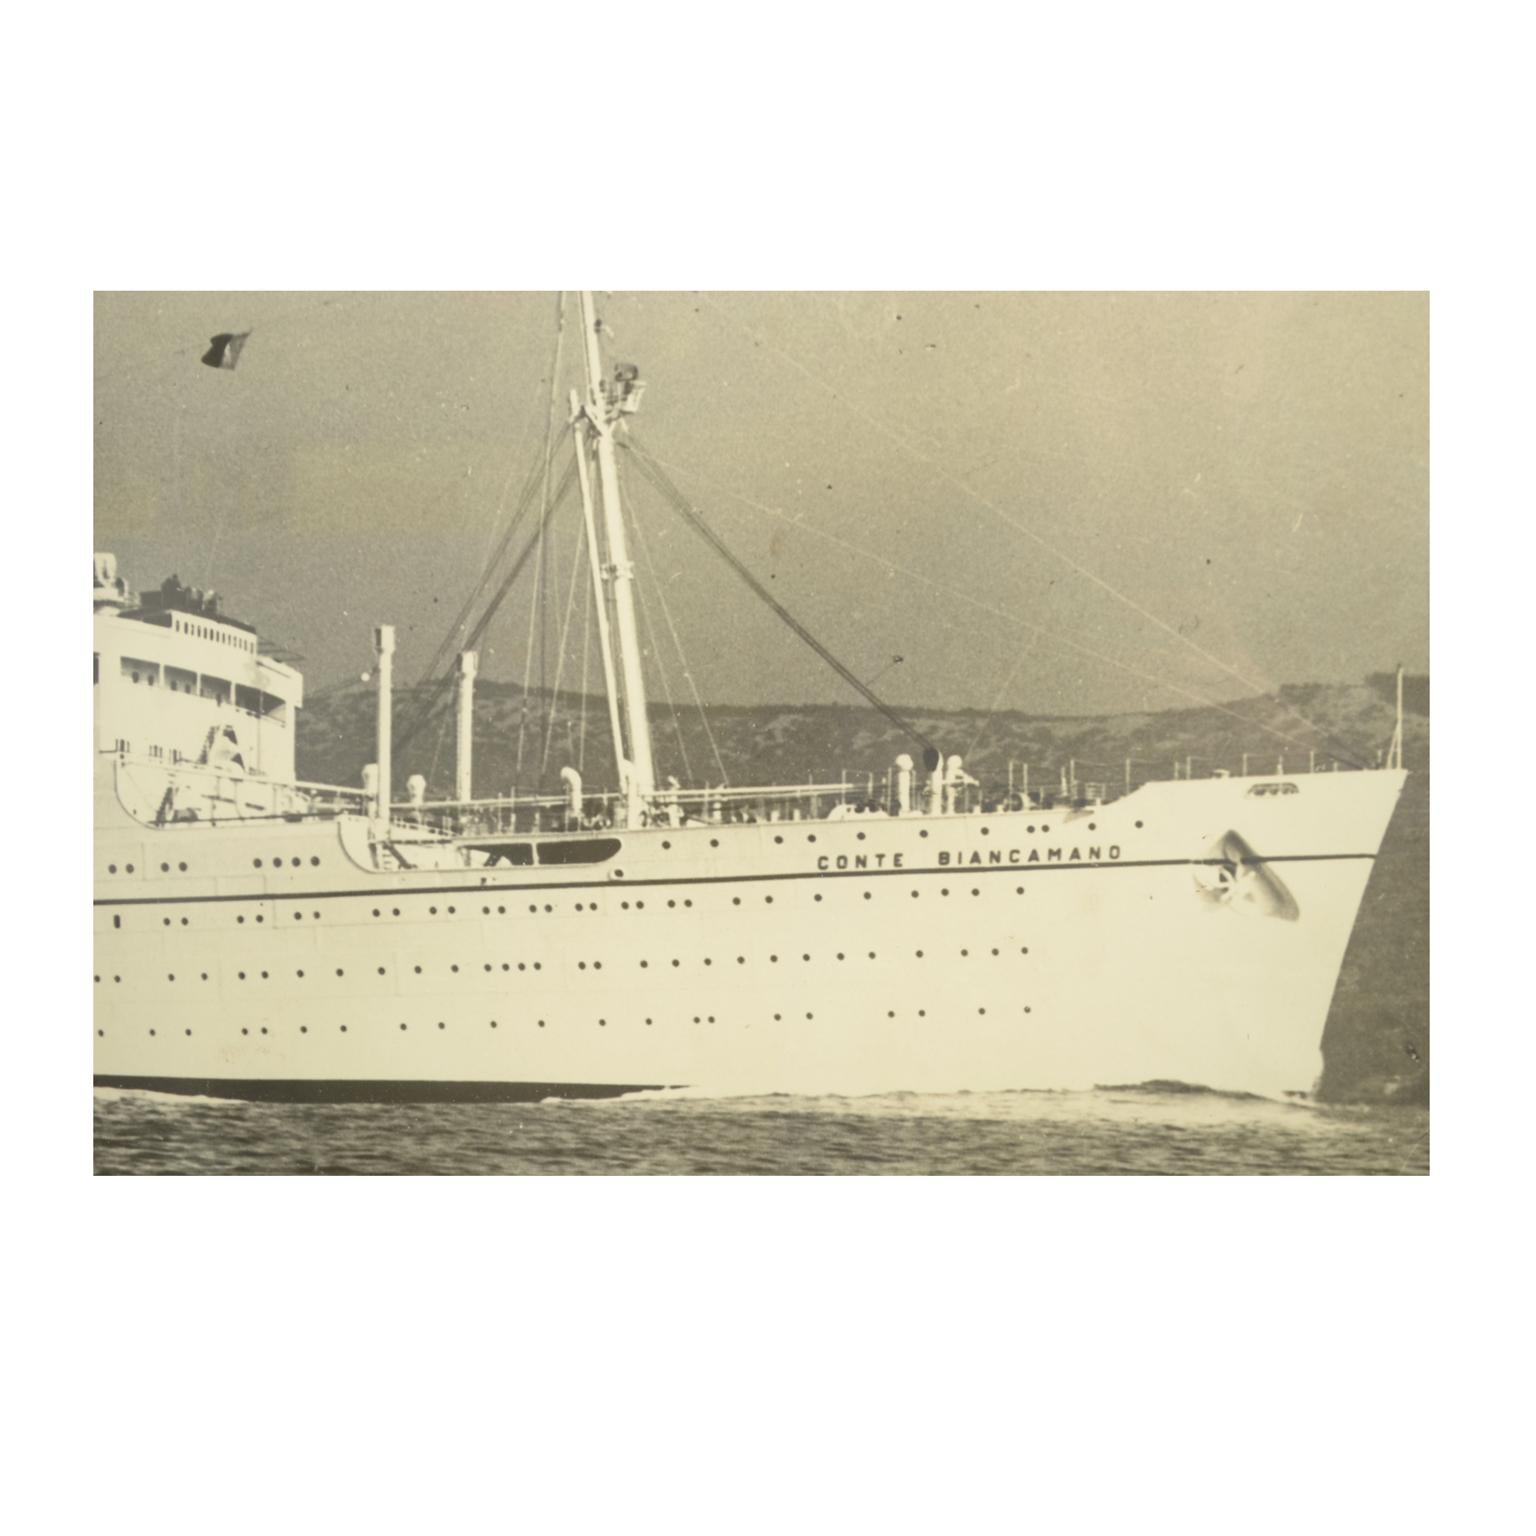 Mid-20th Century Large Black and White Historical Picture of the Ship Conte Biancamano